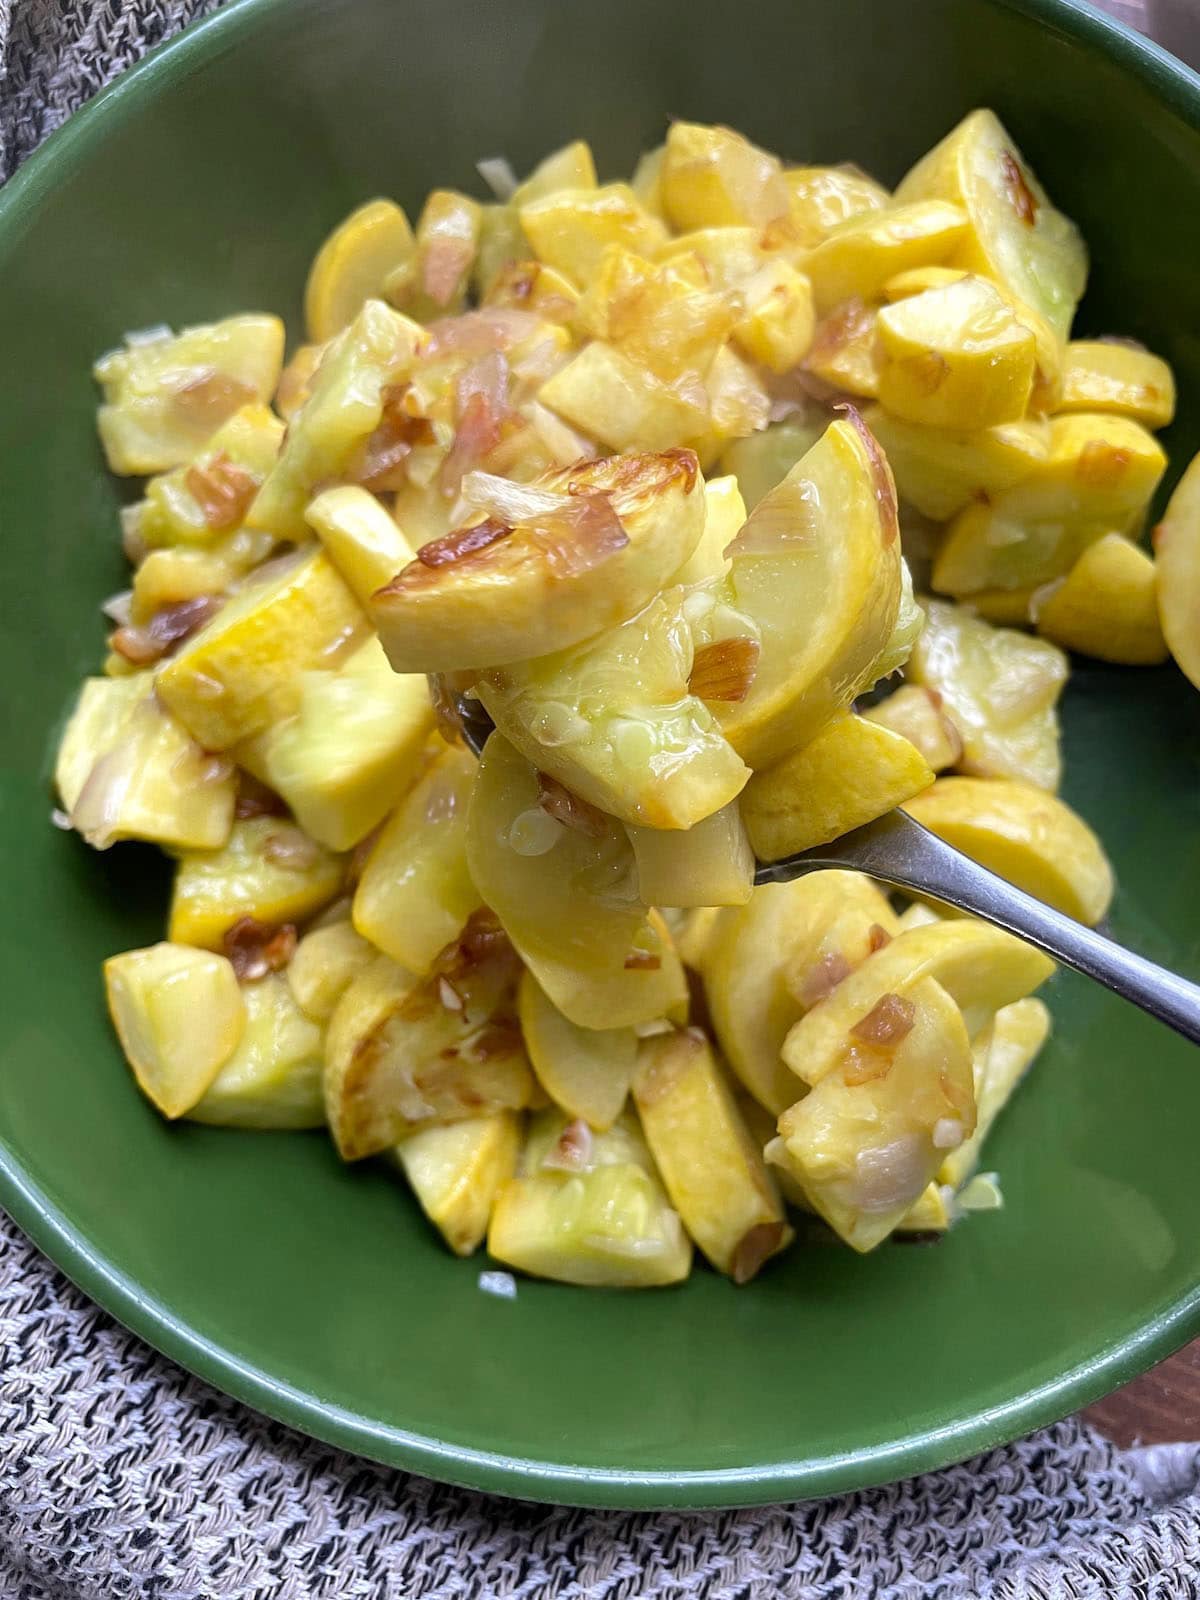 A green bowl filled with sauteed yellow squash and onions and some being scooped on a spoon.